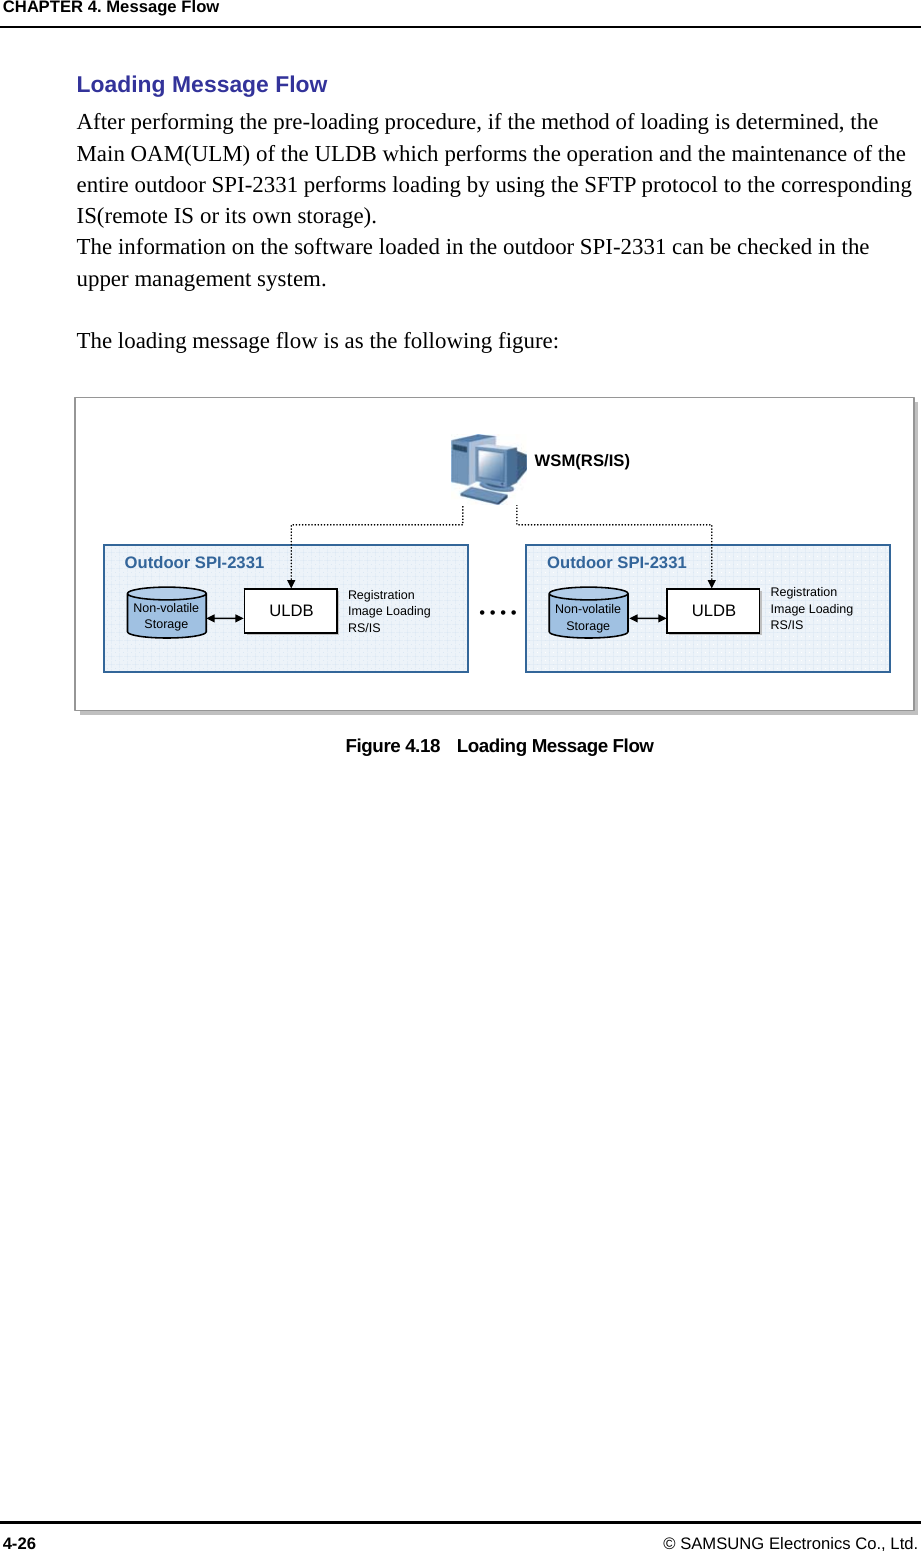 CHAPTER 4. Message Flow 4-26 © SAMSUNG Electronics Co., Ltd. Loading Message Flow After performing the pre-loading procedure, if the method of loading is determined, the Main OAM(ULM) of the ULDB which performs the operation and the maintenance of the entire outdoor SPI-2331 performs loading by using the SFTP protocol to the corresponding IS(remote IS or its own storage).   The information on the software loaded in the outdoor SPI-2331 can be checked in the upper management system.    The loading message flow is as the following figure:  Figure 4.18    Loading Message Flow  Outdoor SPI-2331 ULDB Outdoor SPI-2331 ULDB • • • •WSM(RS/IS)Registration Image Loading   RS/IS Registration Image Loading   RS/IS Non-volatile Storage Non-volatileStorage